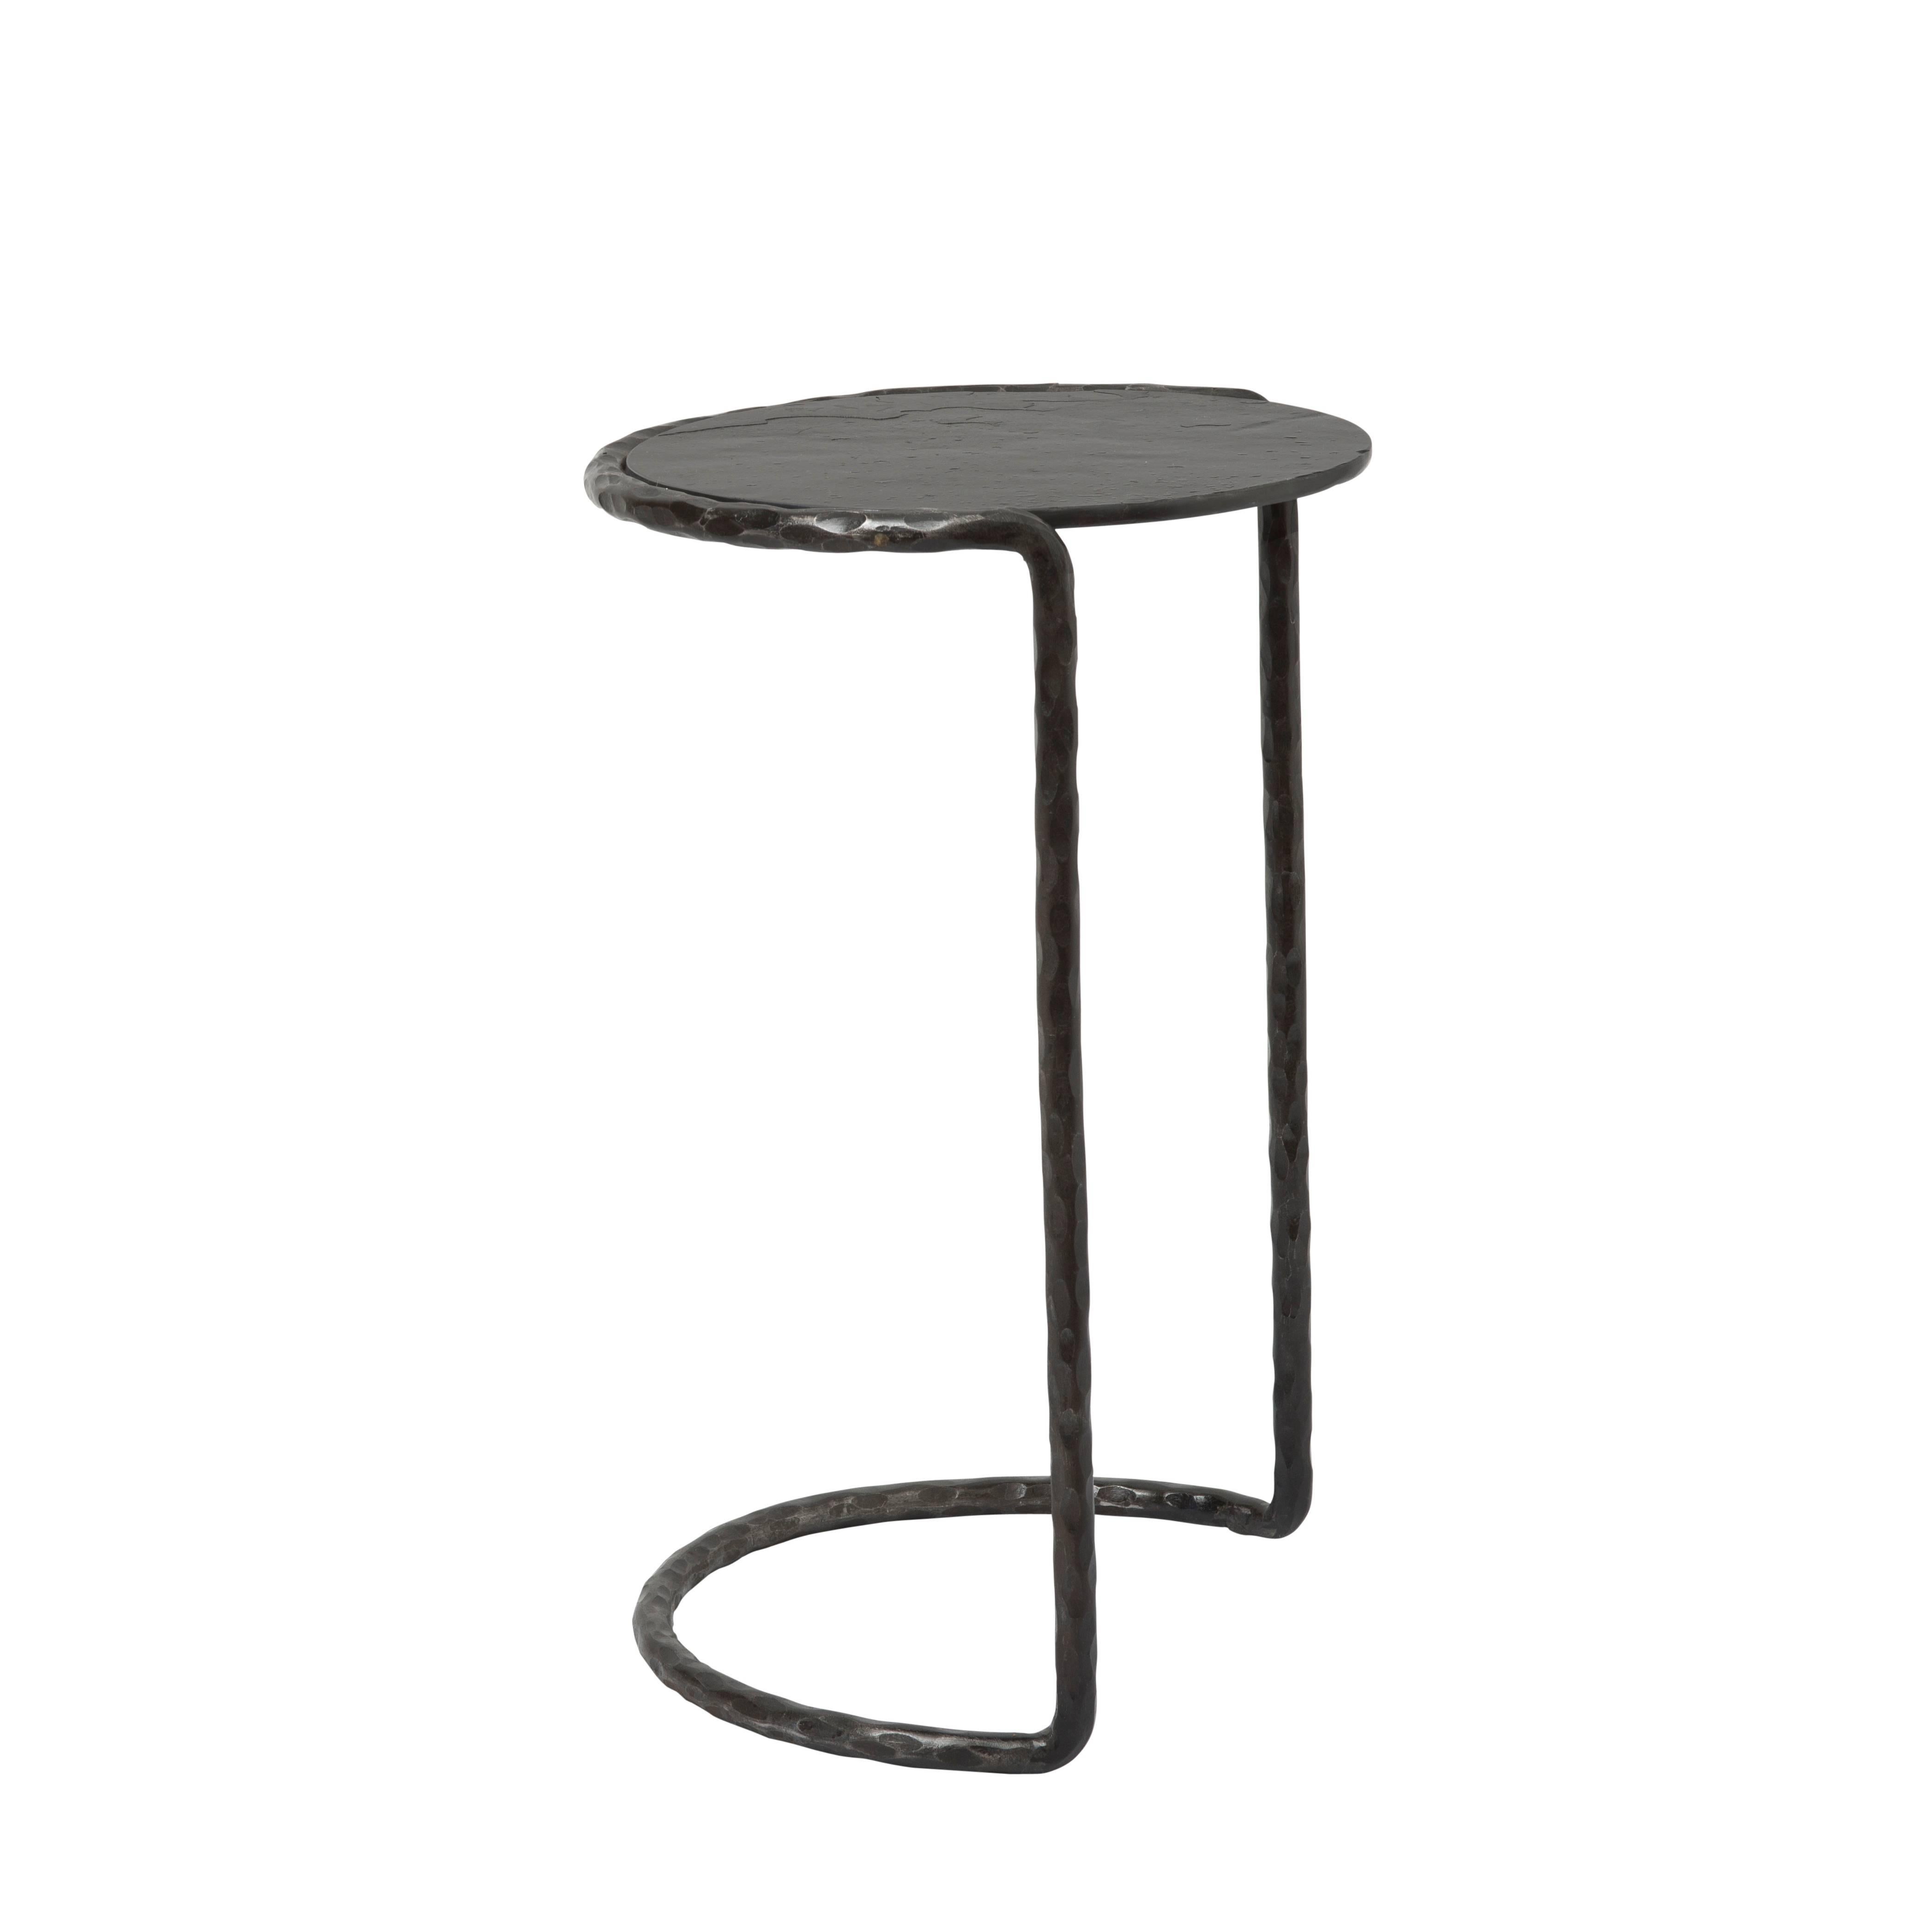 Side table in a blackened steel frame with a hand-cut slate top in black.